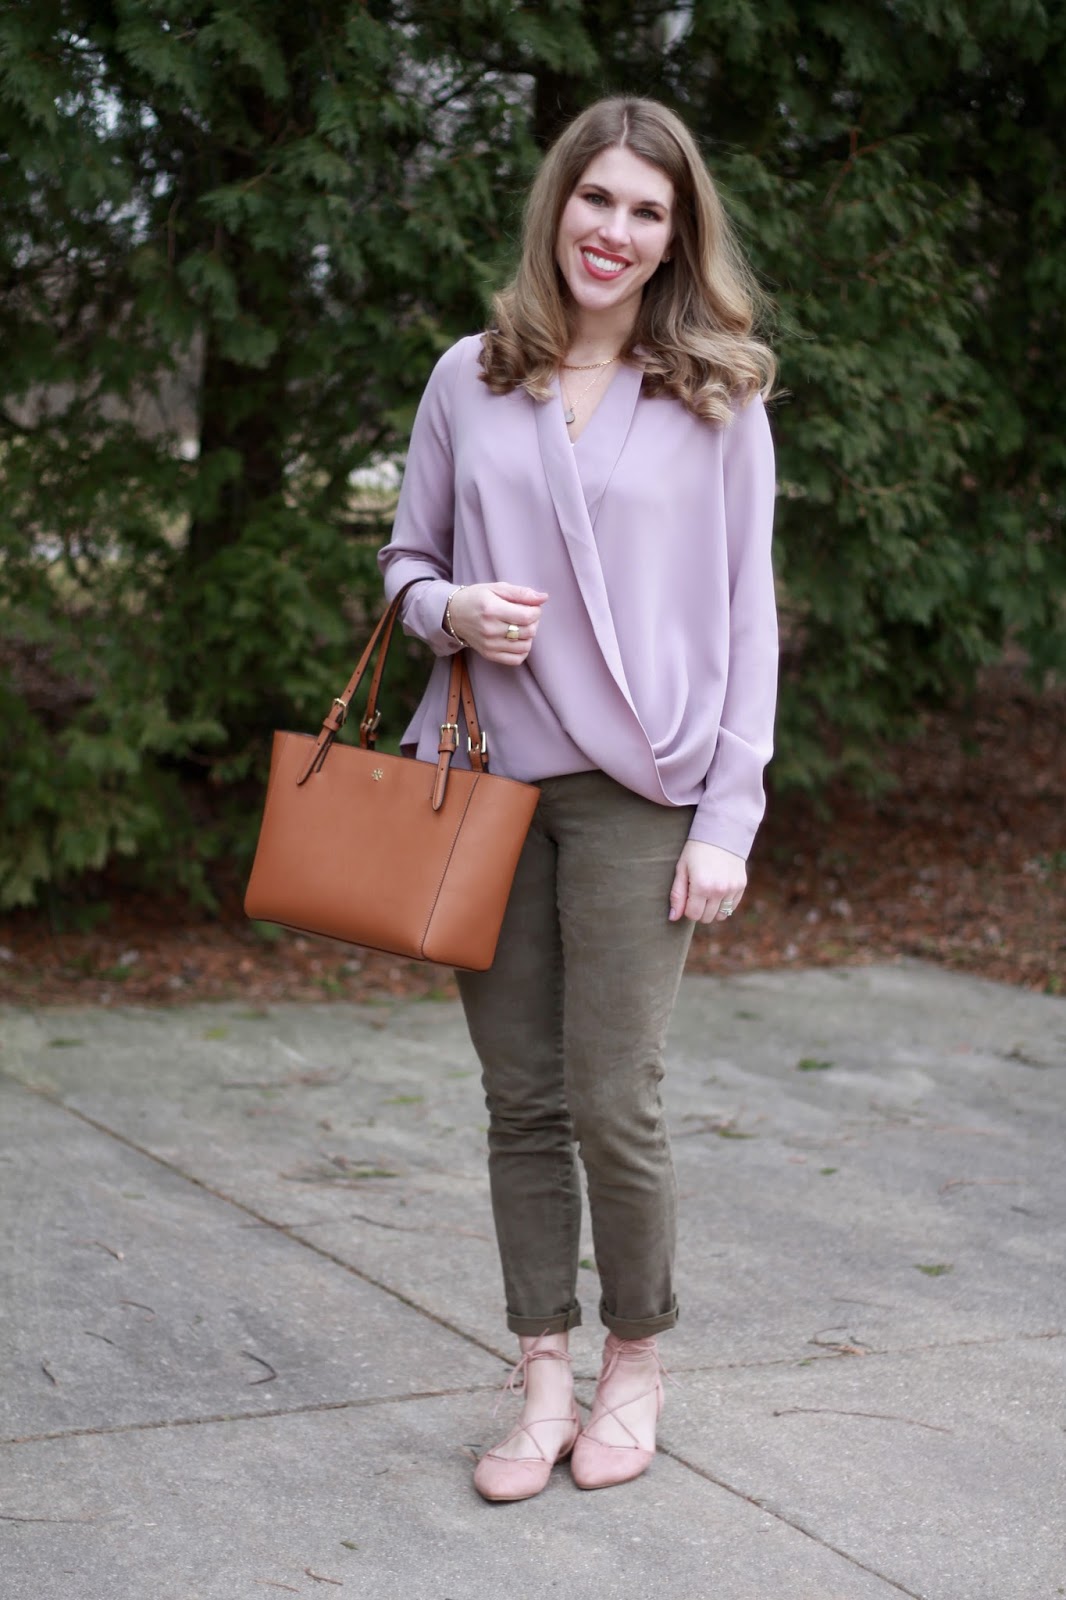 Crossover Blouse and Confident Twosday Linkup - I do deClaire